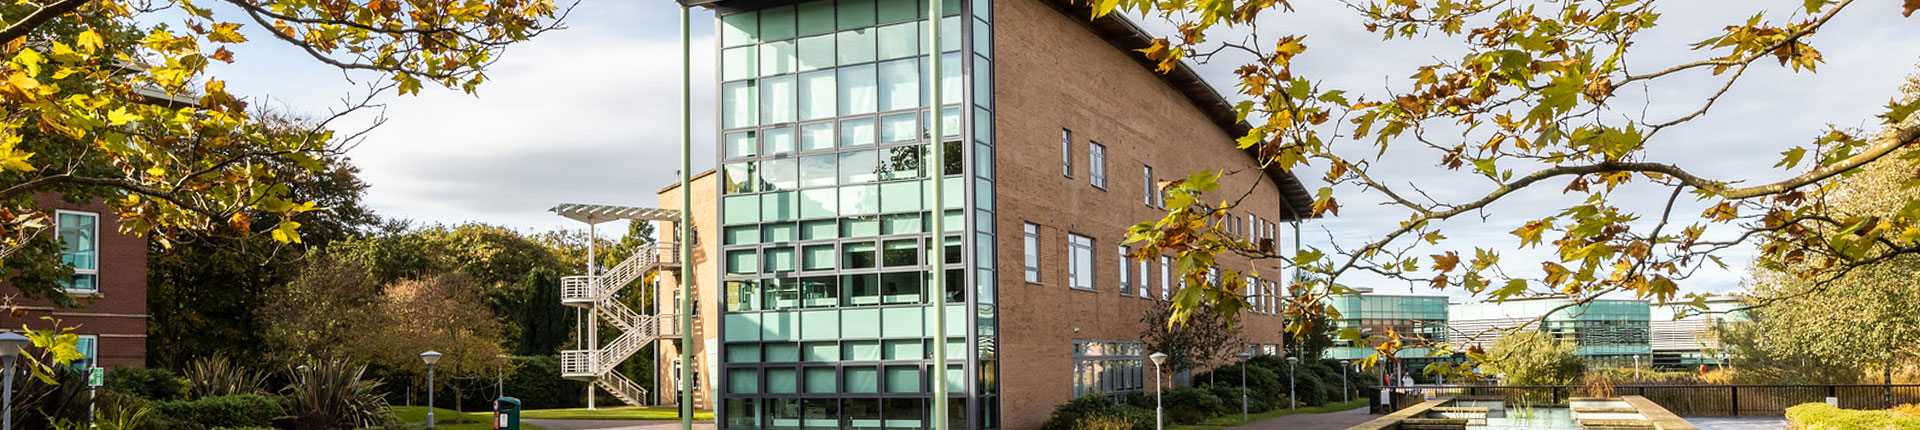 Exterior shot of the Clinical Skills and Simulation Centre building on campus.